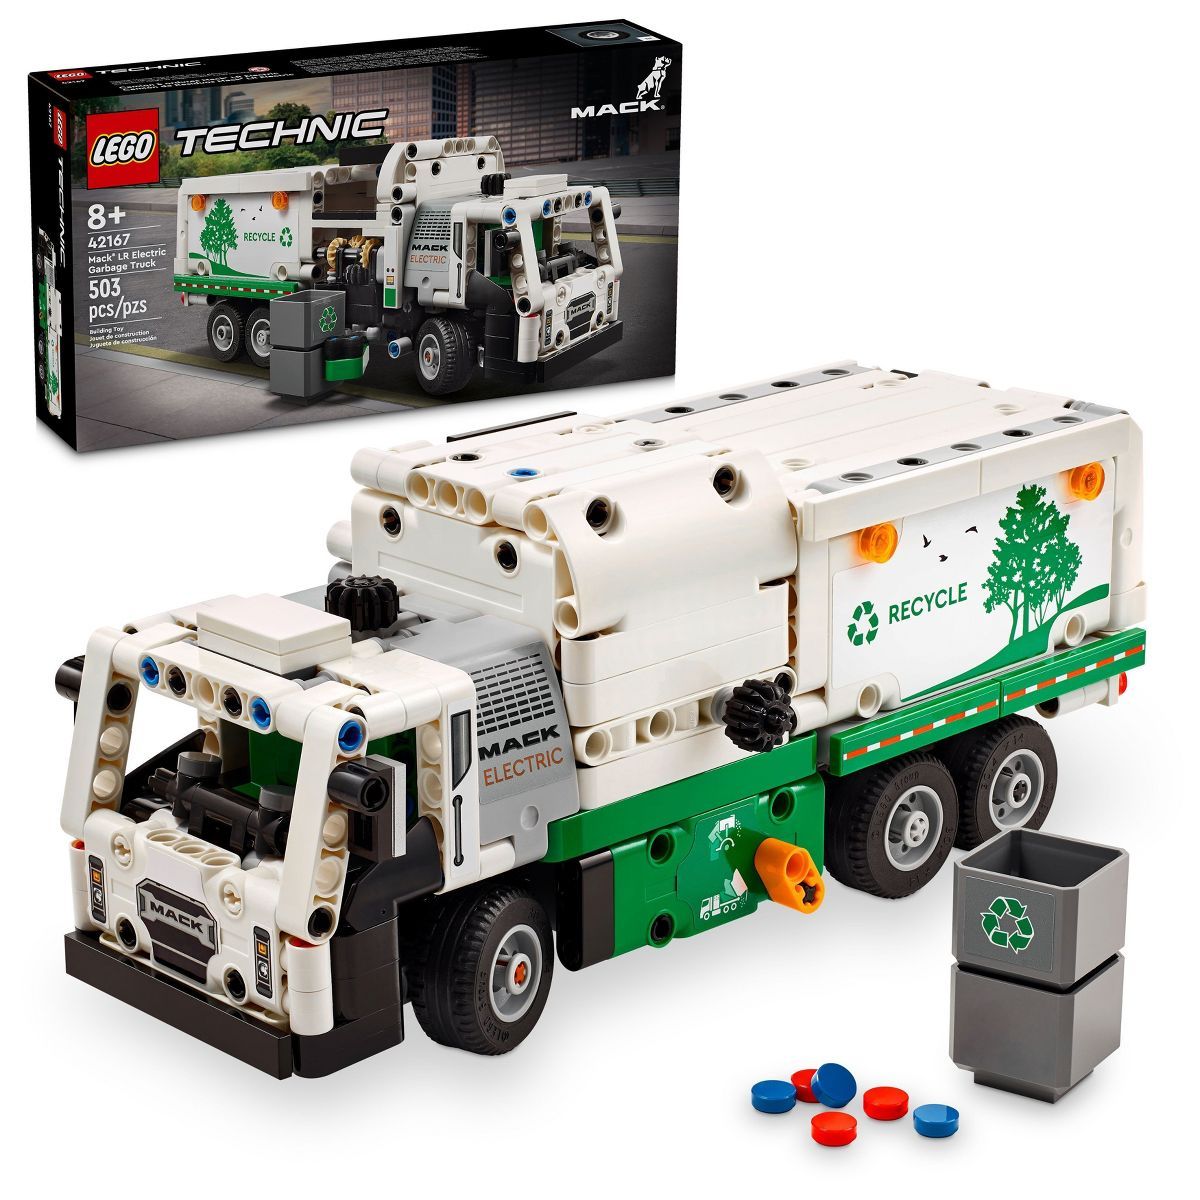 LEGO Technic Mack LR Electric Garbage Truck Toy 42167 | Target